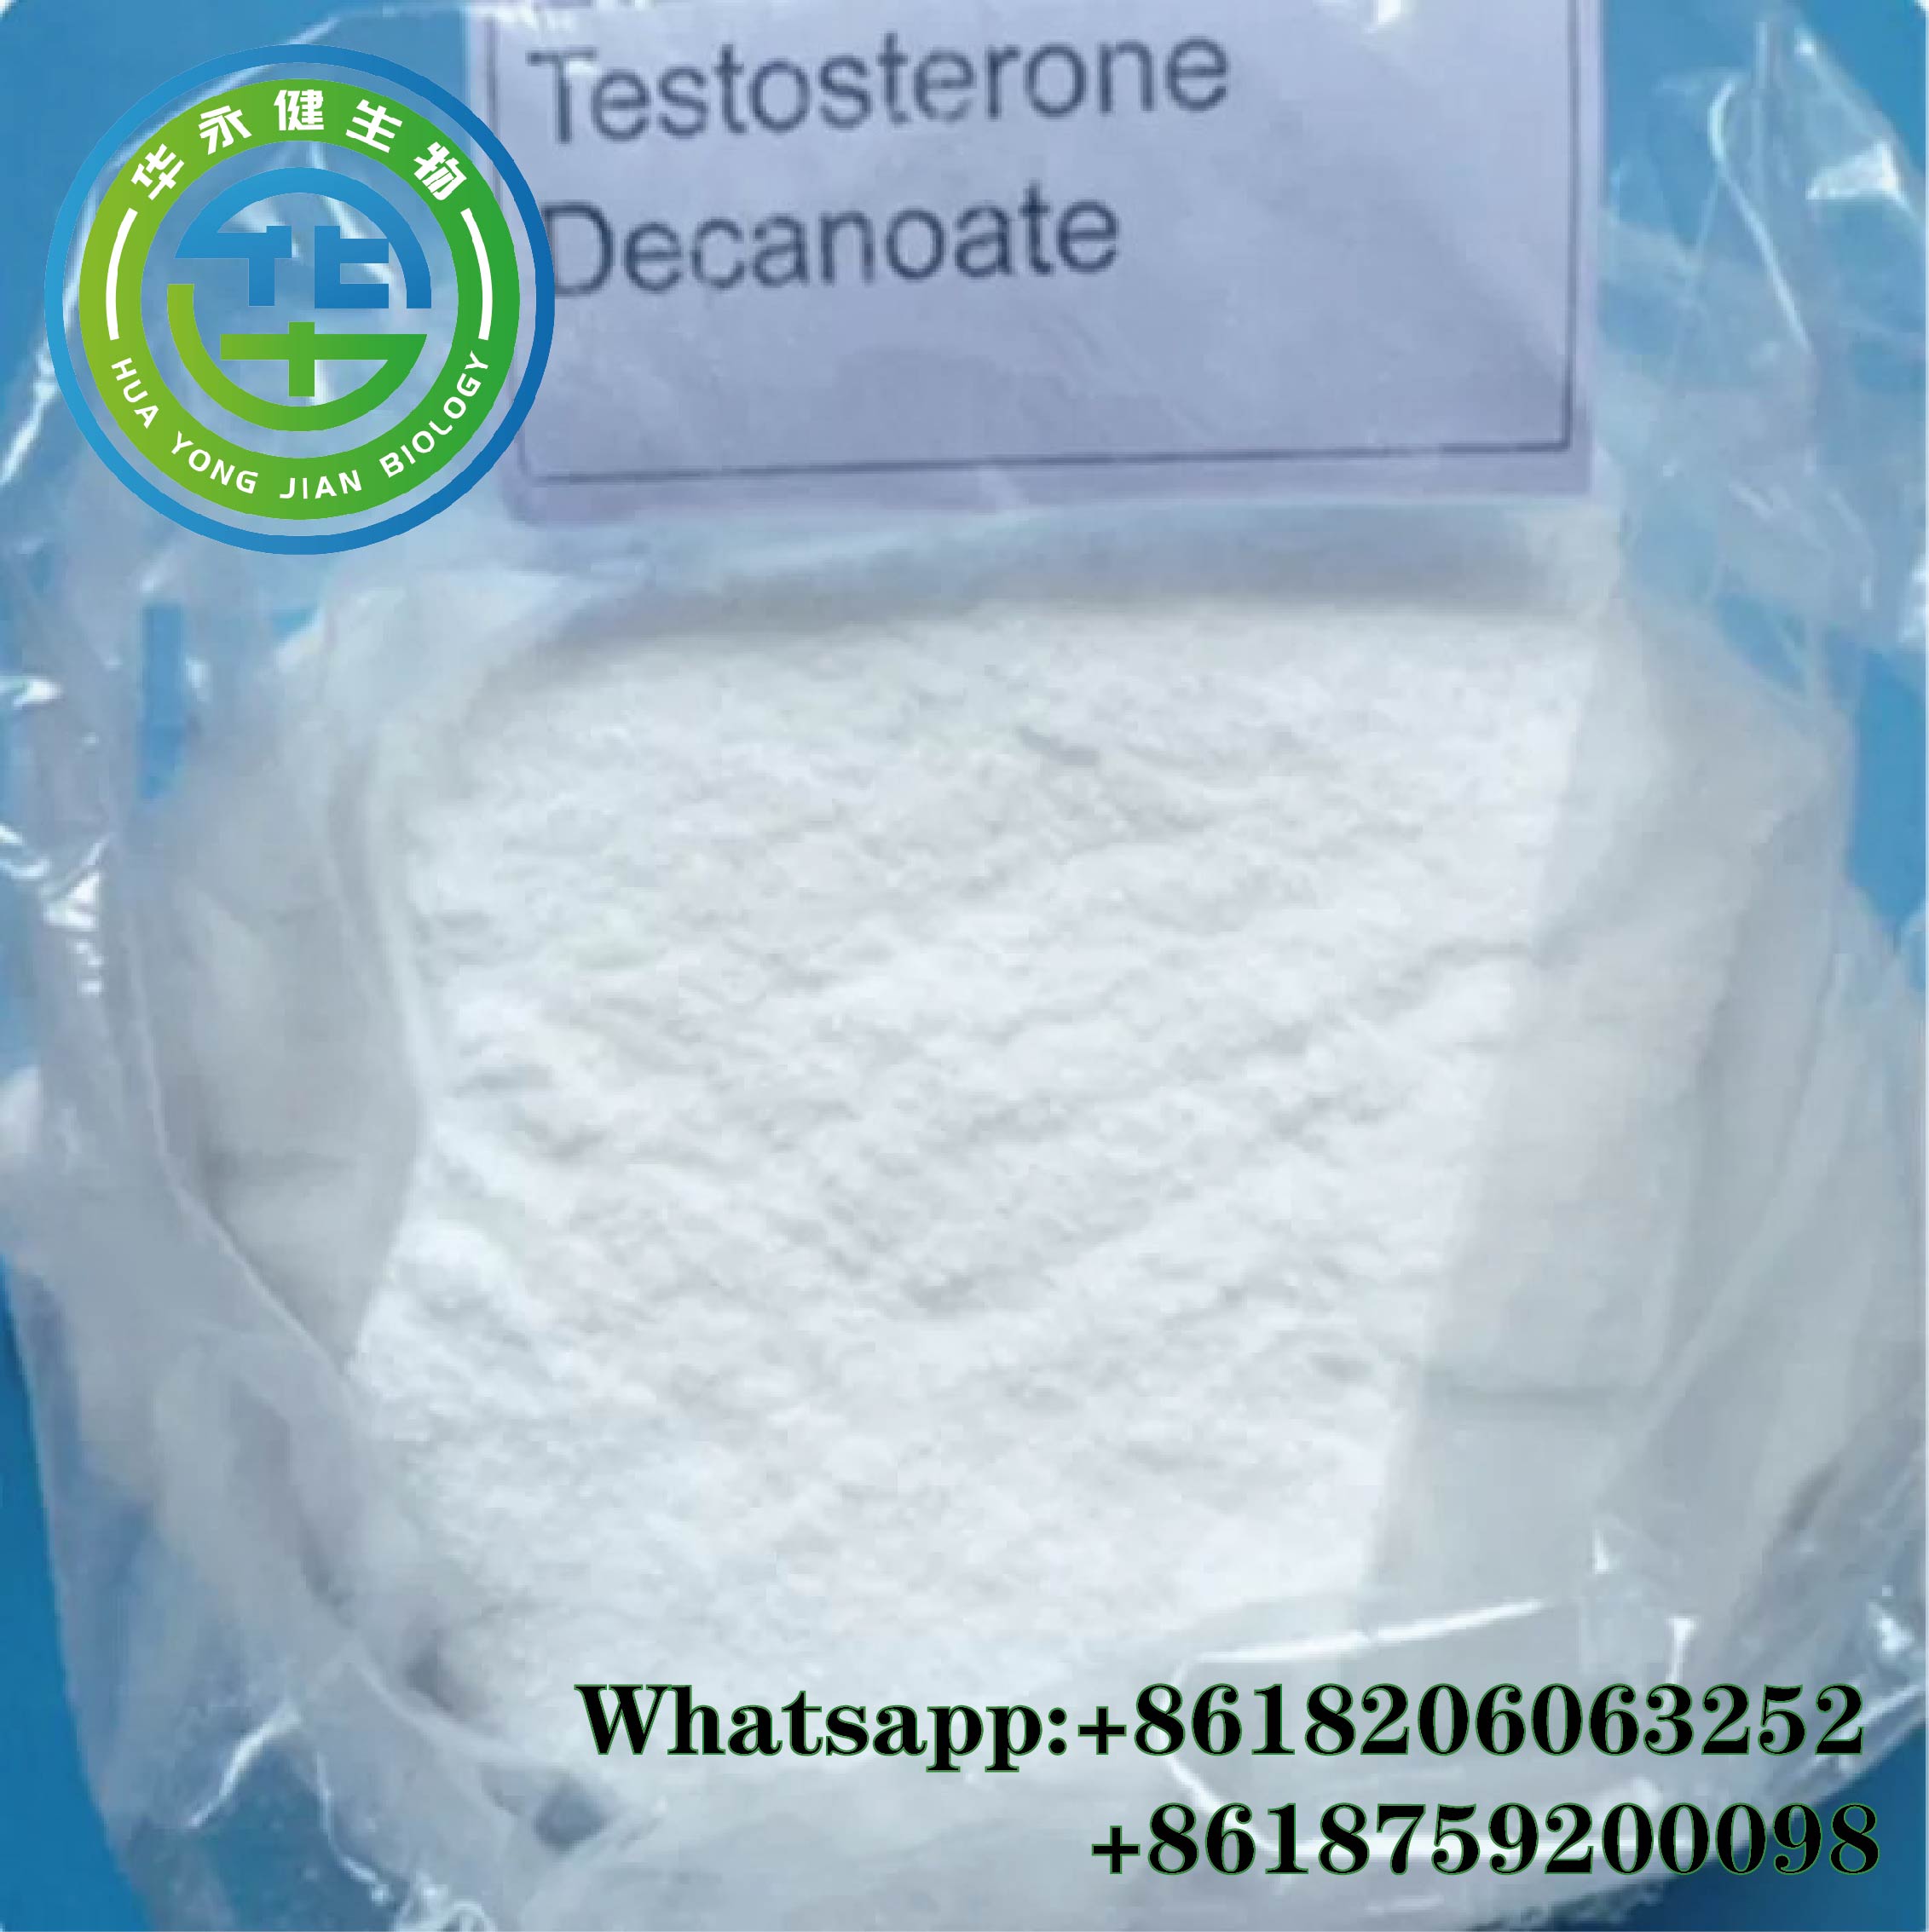 Test Deca Steroid Hormone body building Testosterone Decanoate Injection steroid powder CasNO.5721-91-5